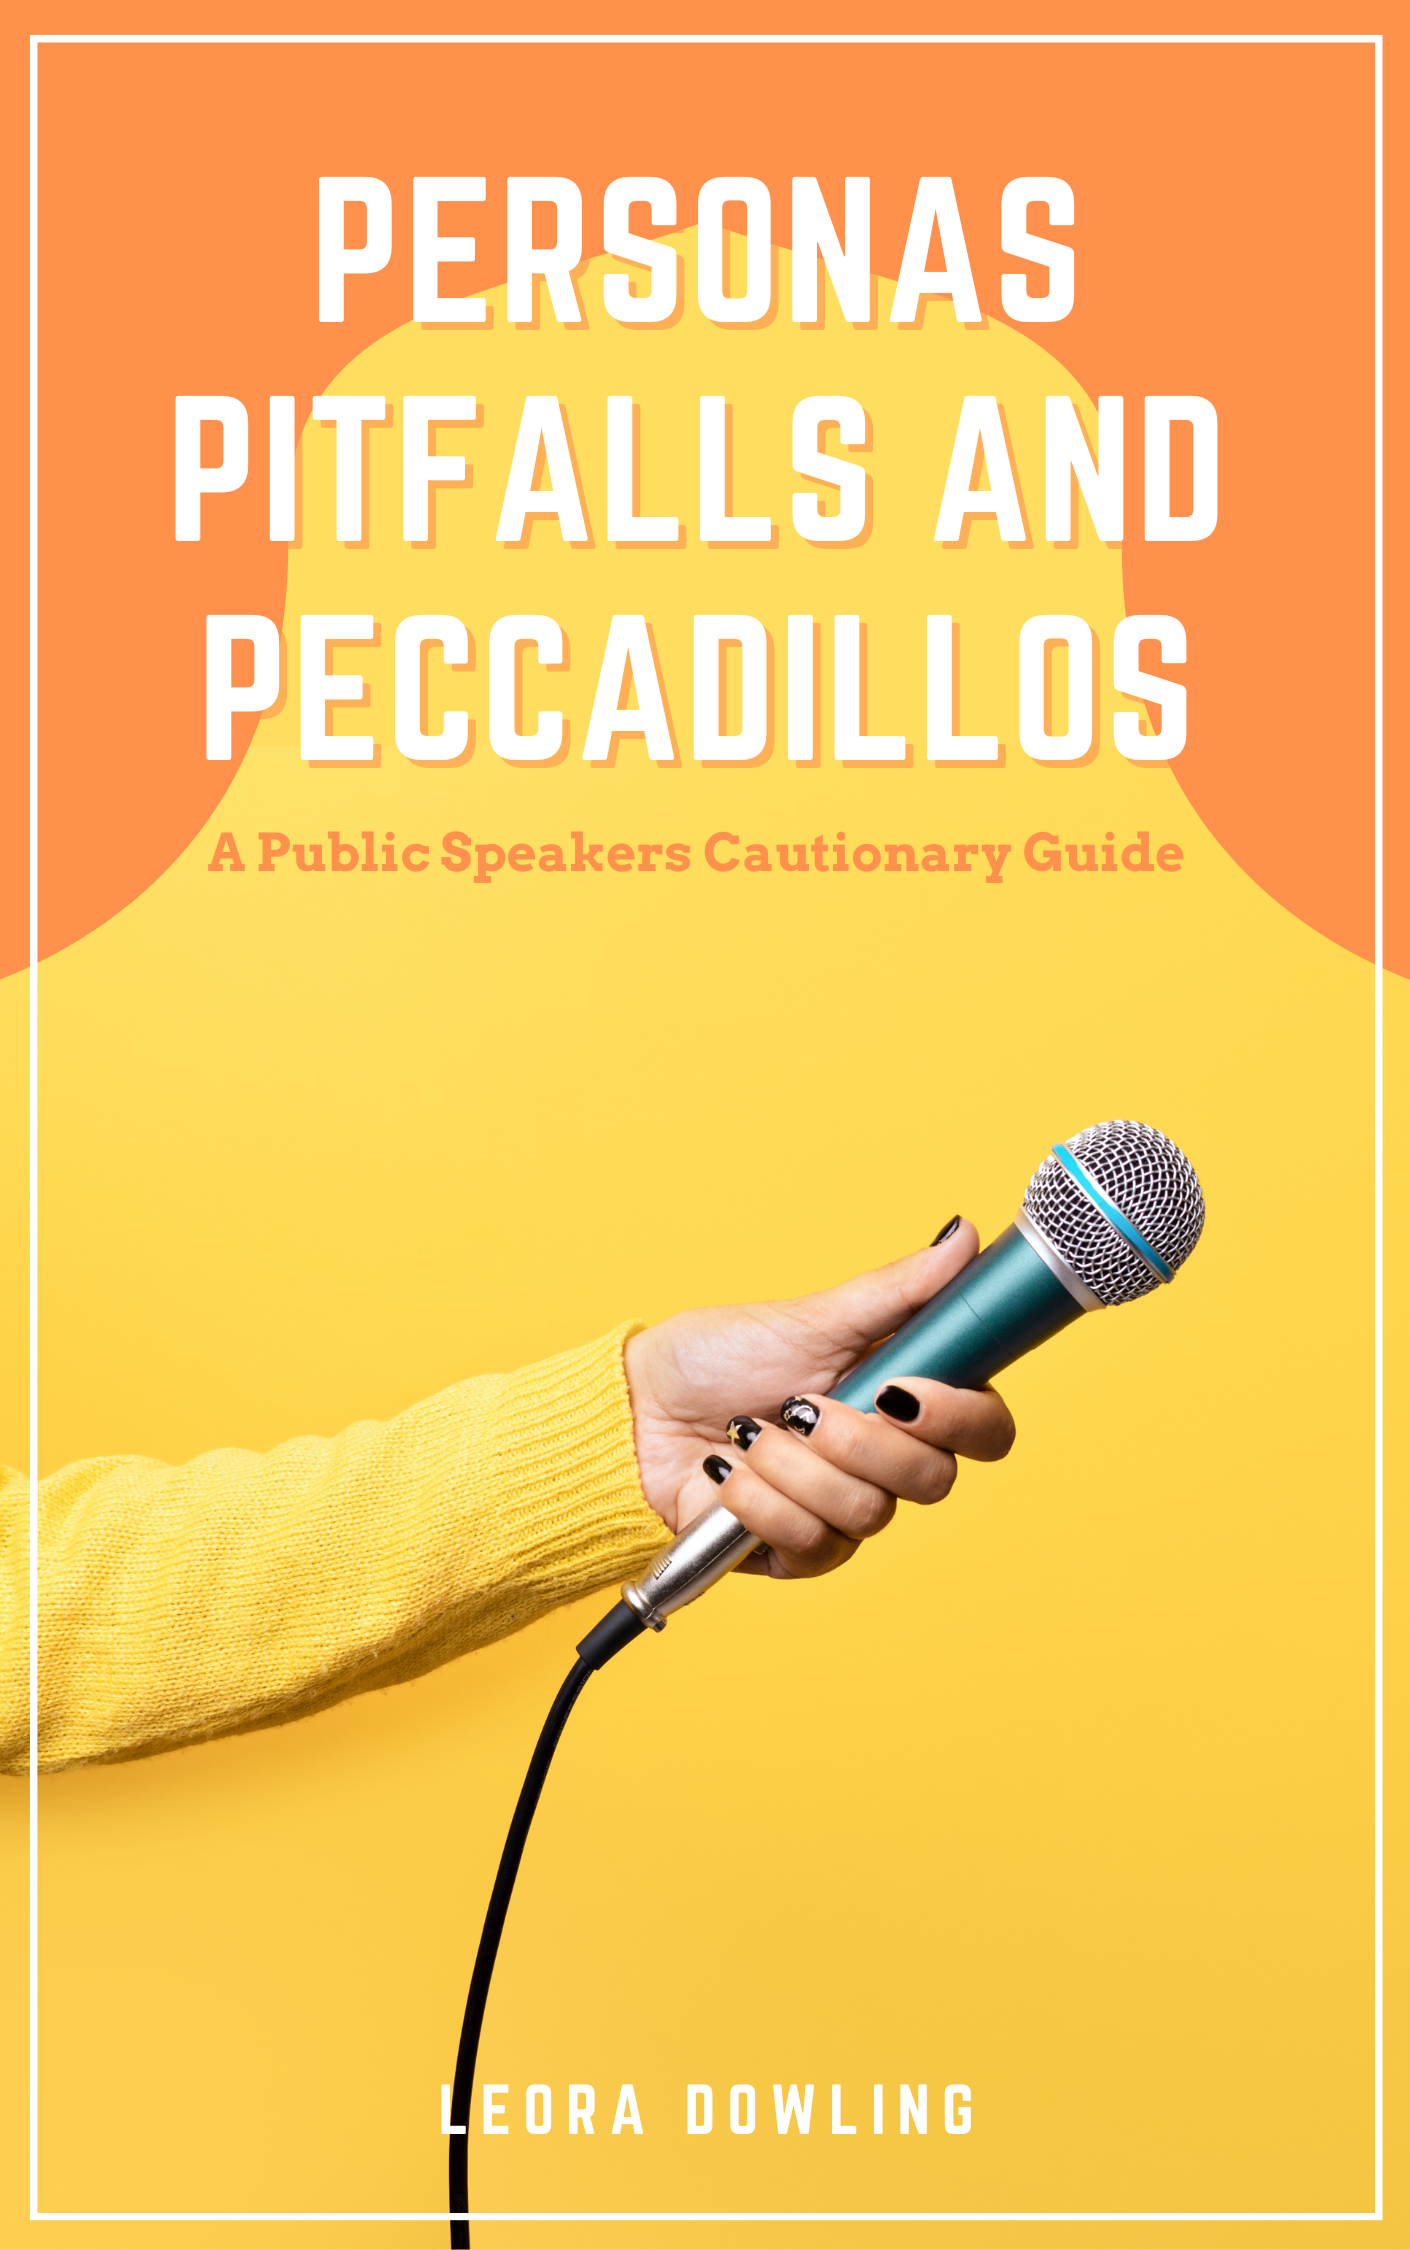 Audiobook cover for Leora Dowling's book Personas, Pitfalls and Peccadillos